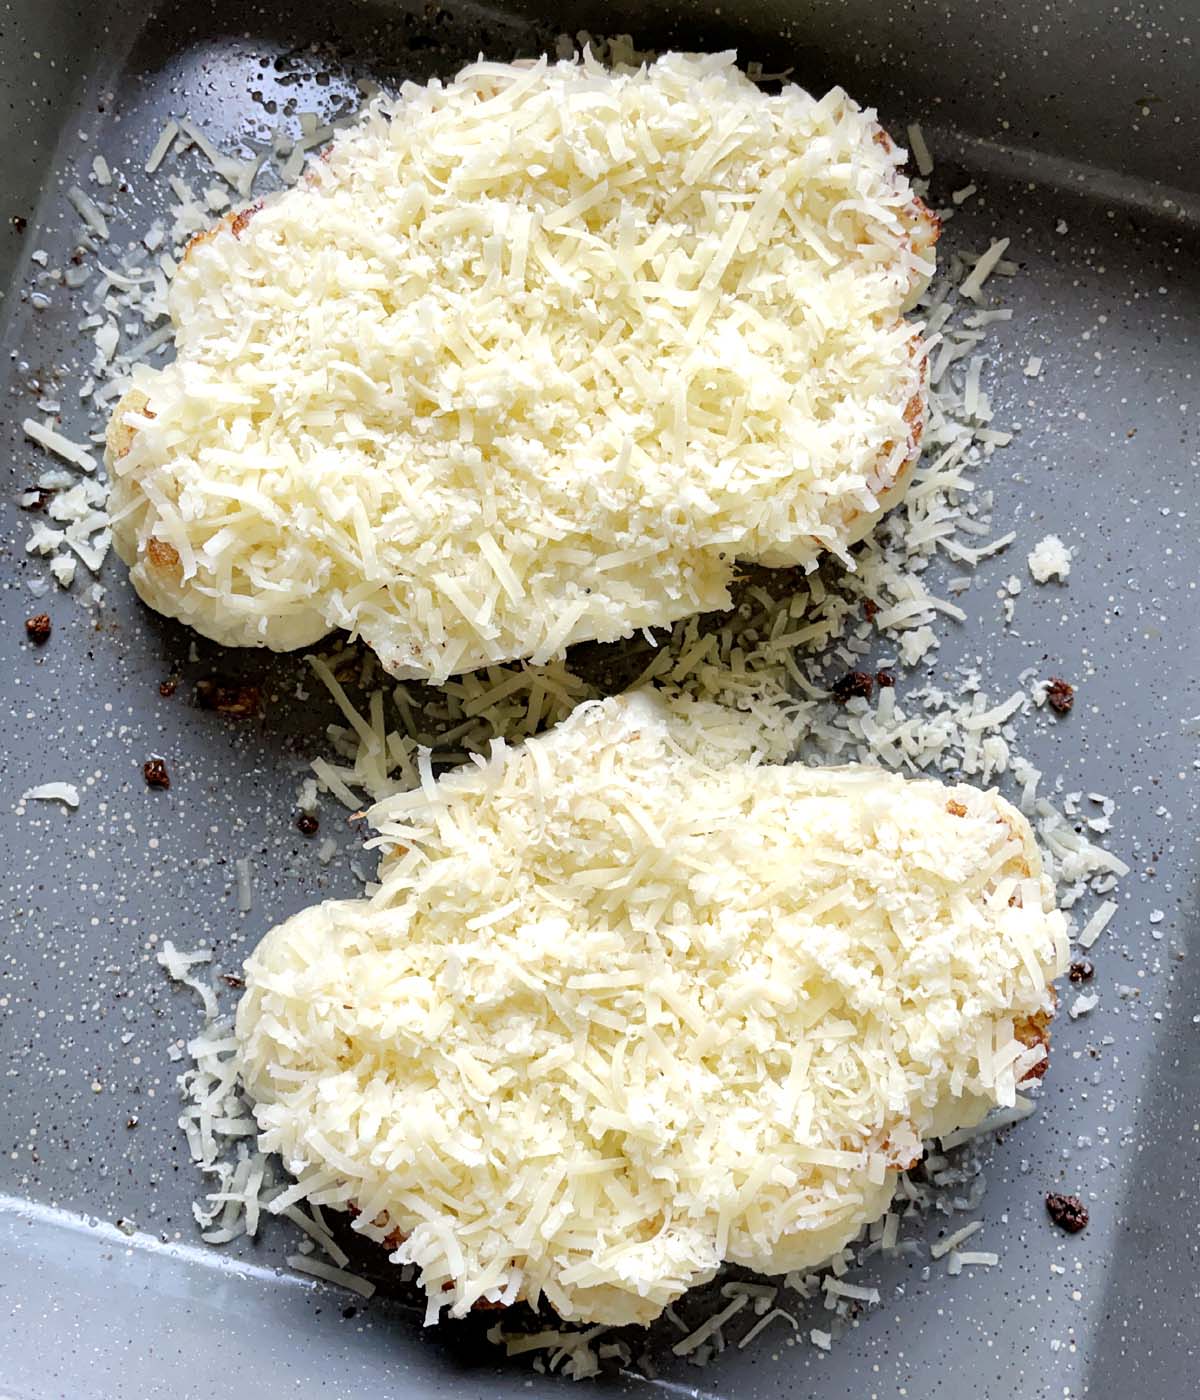 Two cauliflower steaks topped with grated parmesan cheese in a grey baking pan.